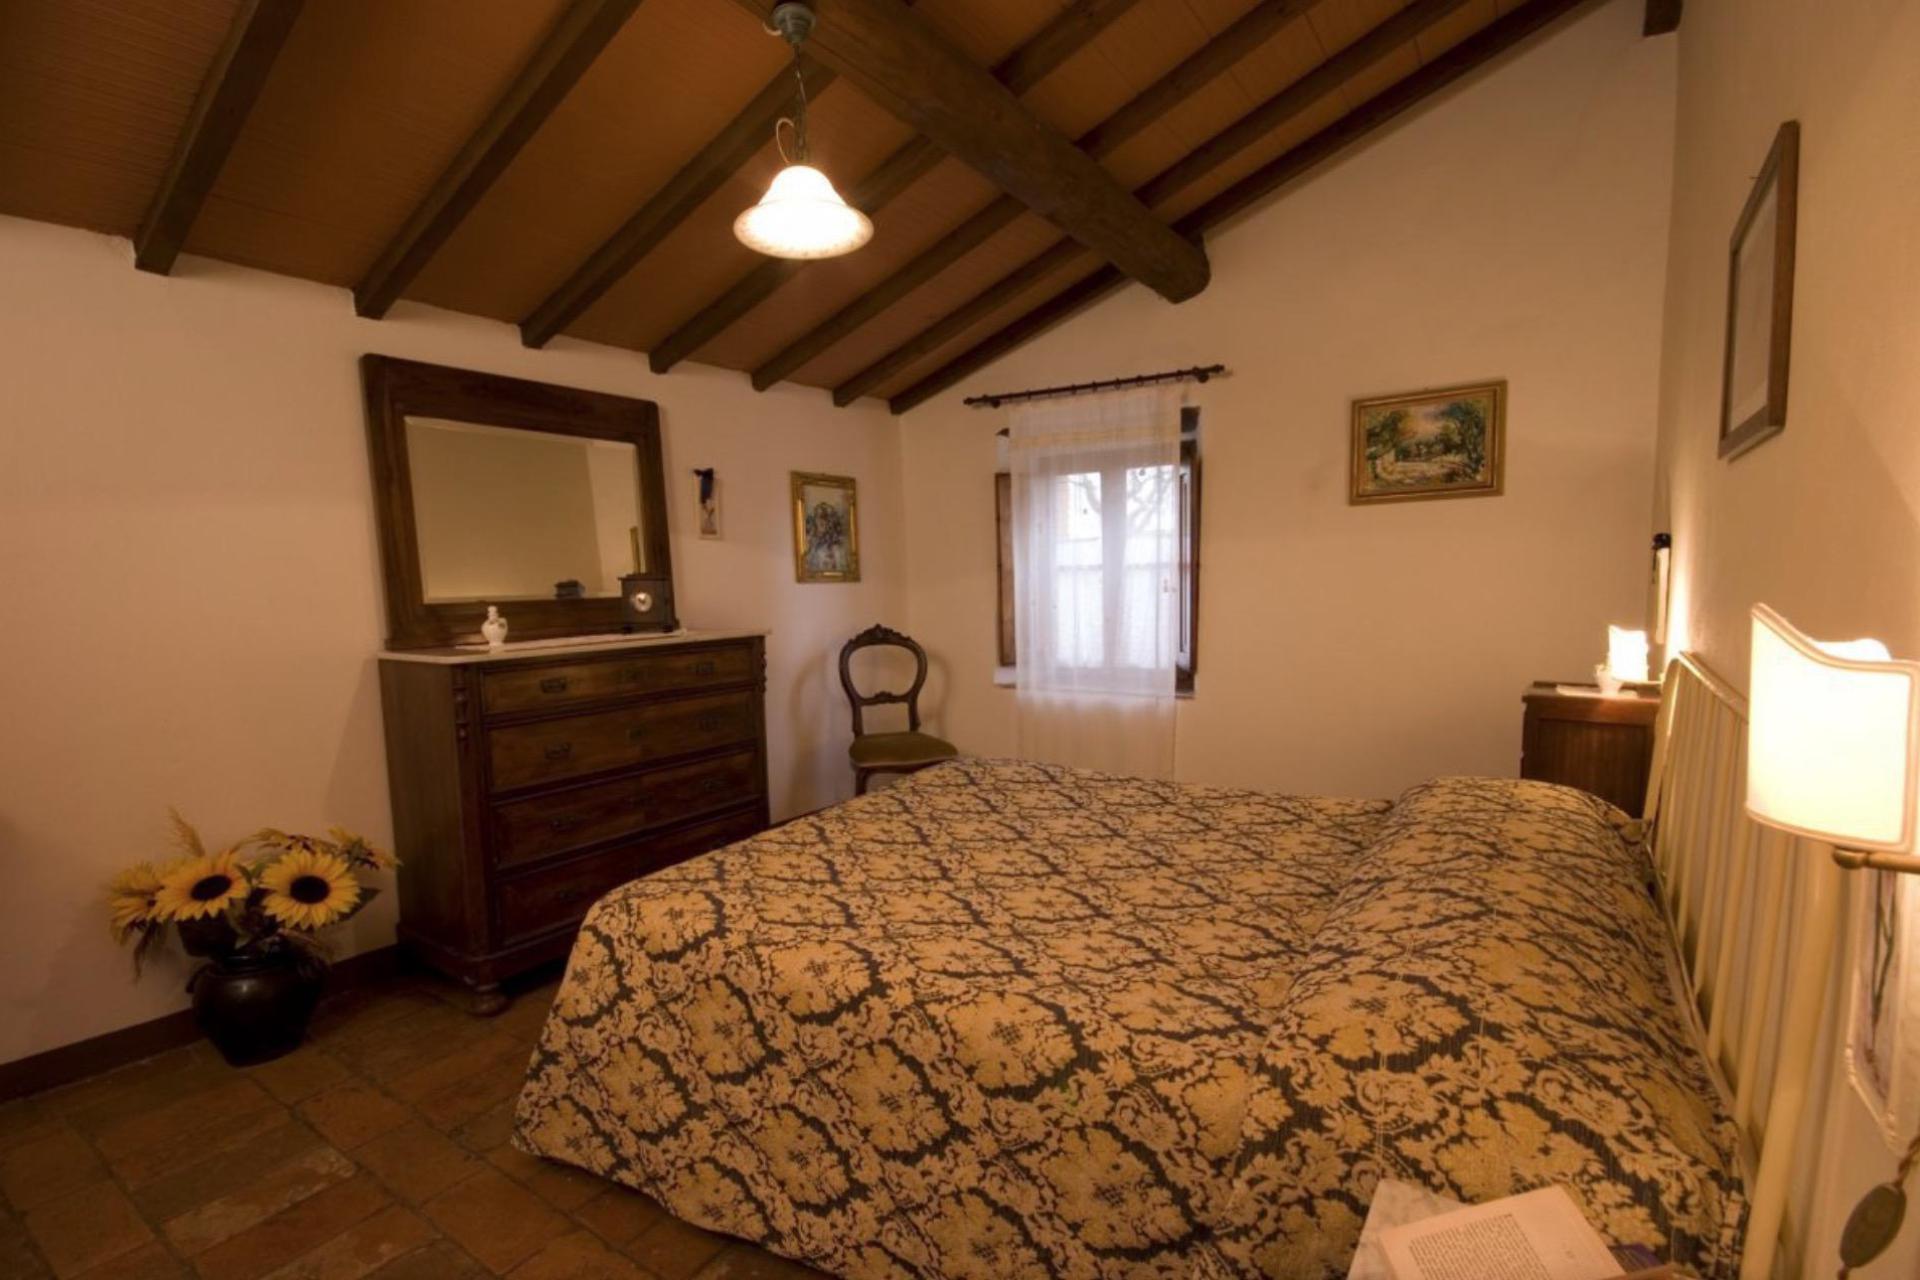 Agriturismo Tuscany Characteristic agriturismo centrally located in Tuscany